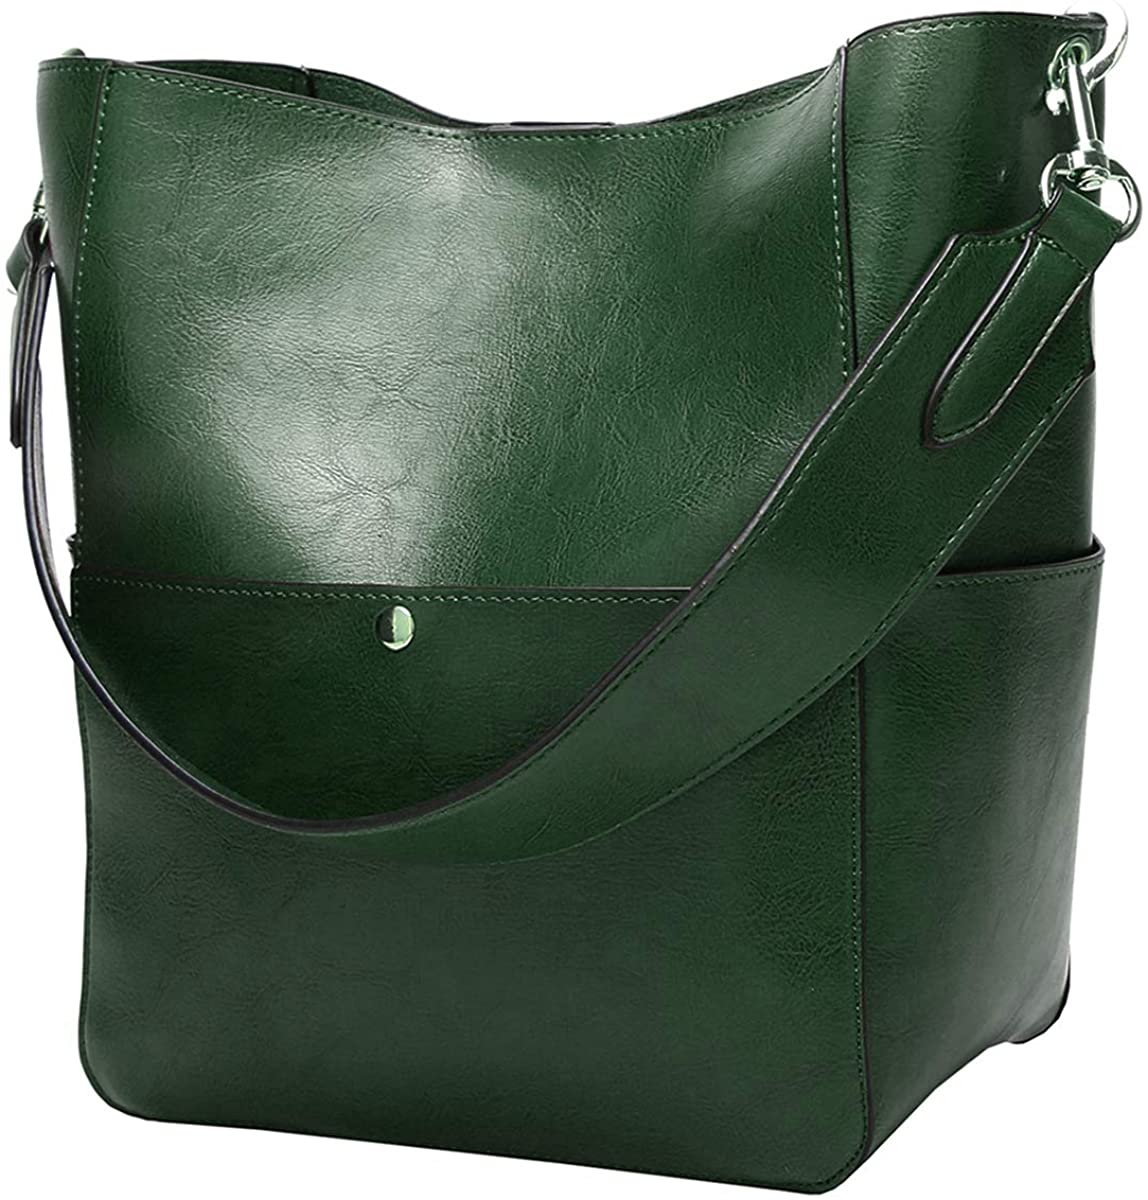 Leather Tote | Genuine Leather Tote Bags - ROMY TISA